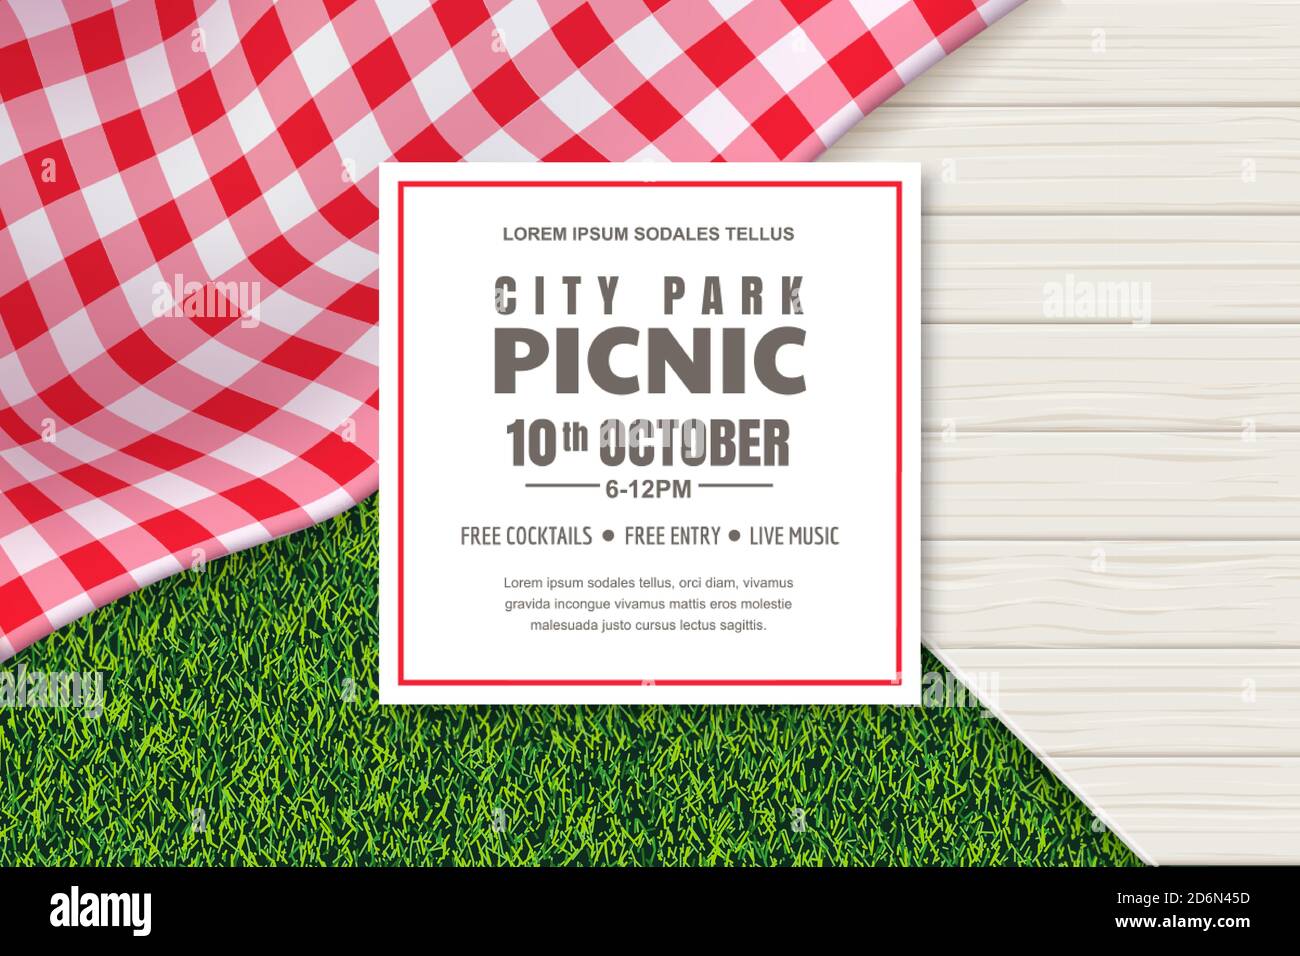 Picnic poster or banner design template. Vector background with realistic red gingham plaid or tablecloth, white wooden table and green grass lawn. Re Stock Vector